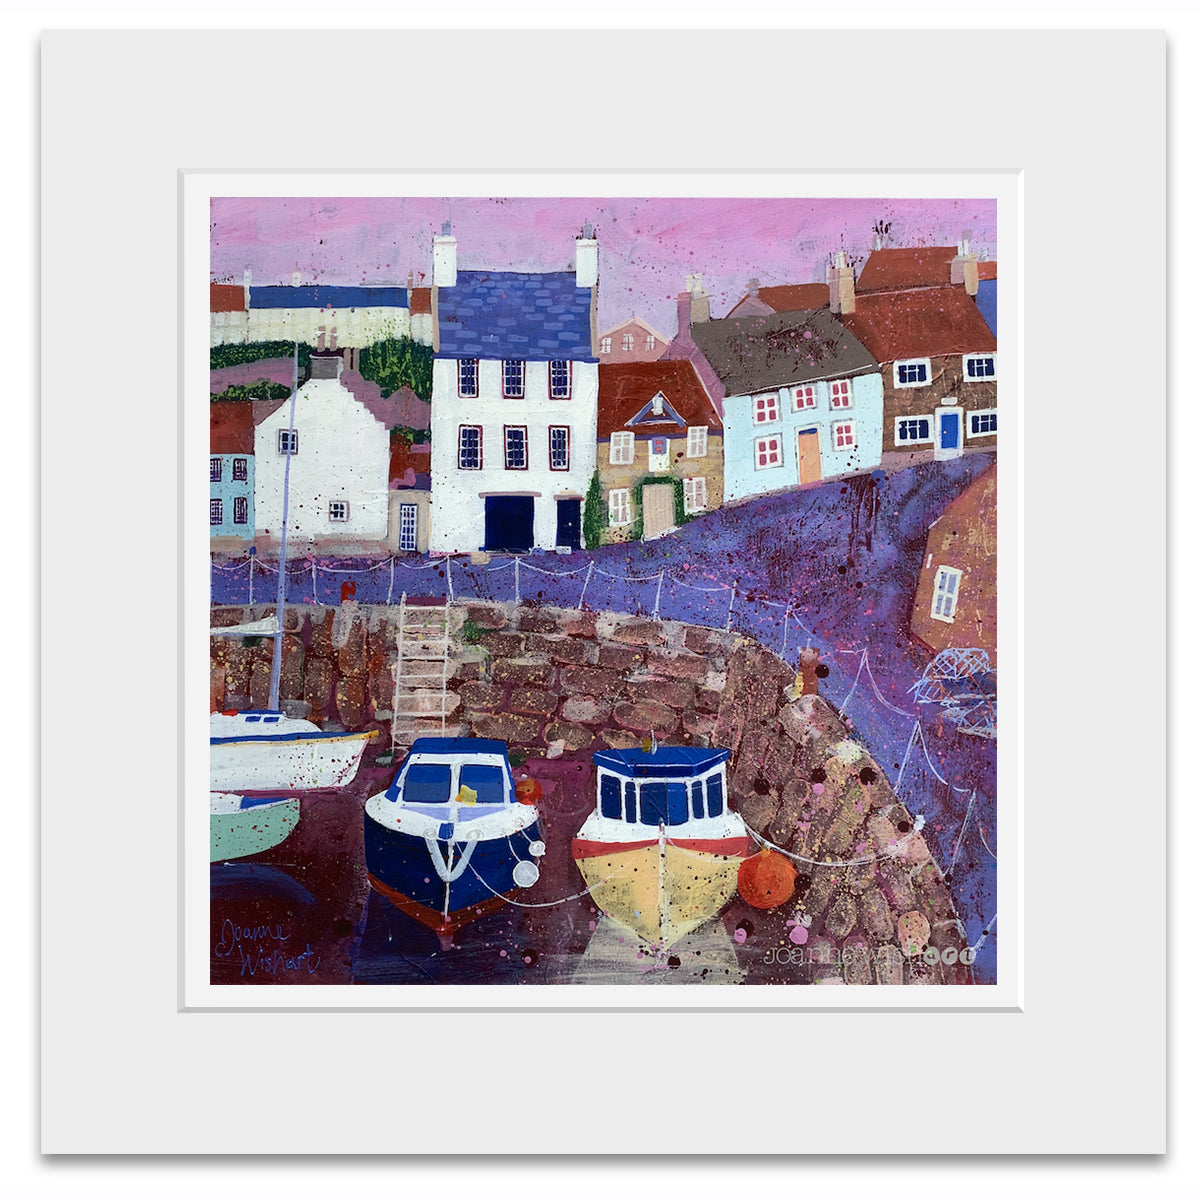 A mounted print of Crail harbour in fife.